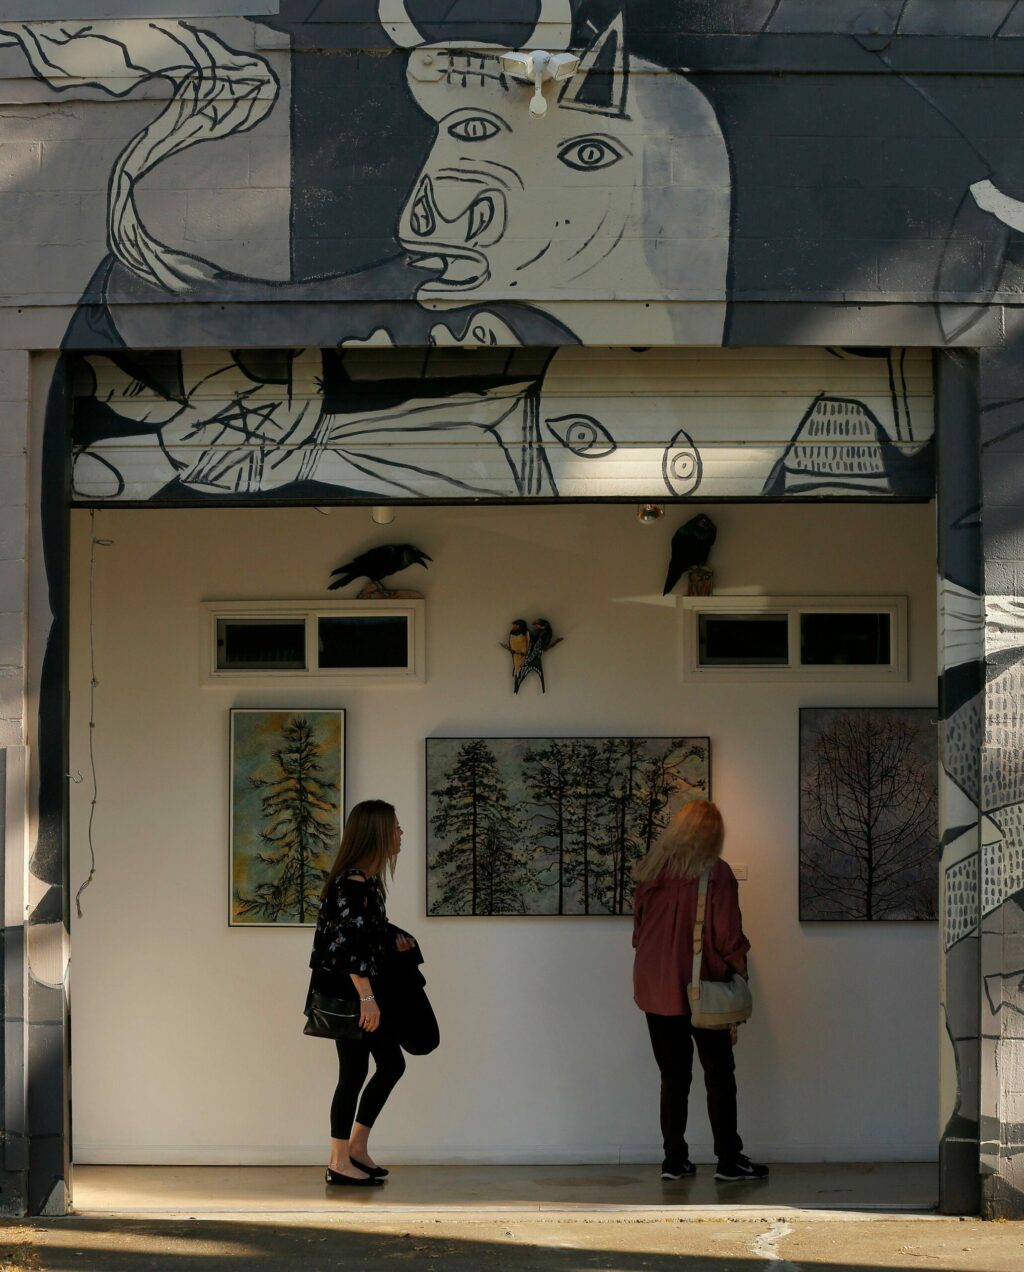 Kim Romero, left, of Healdsburg and Anet Dunne of Santa Rosa view paintings by artist Corrine Haverinen that are displayed at the front of Backstreet Gallery and Studios in the SOFA arts district of Santa Rosa, California, on Friday, May 3, 2019. (Alvin Jornada / The Press Democrat)